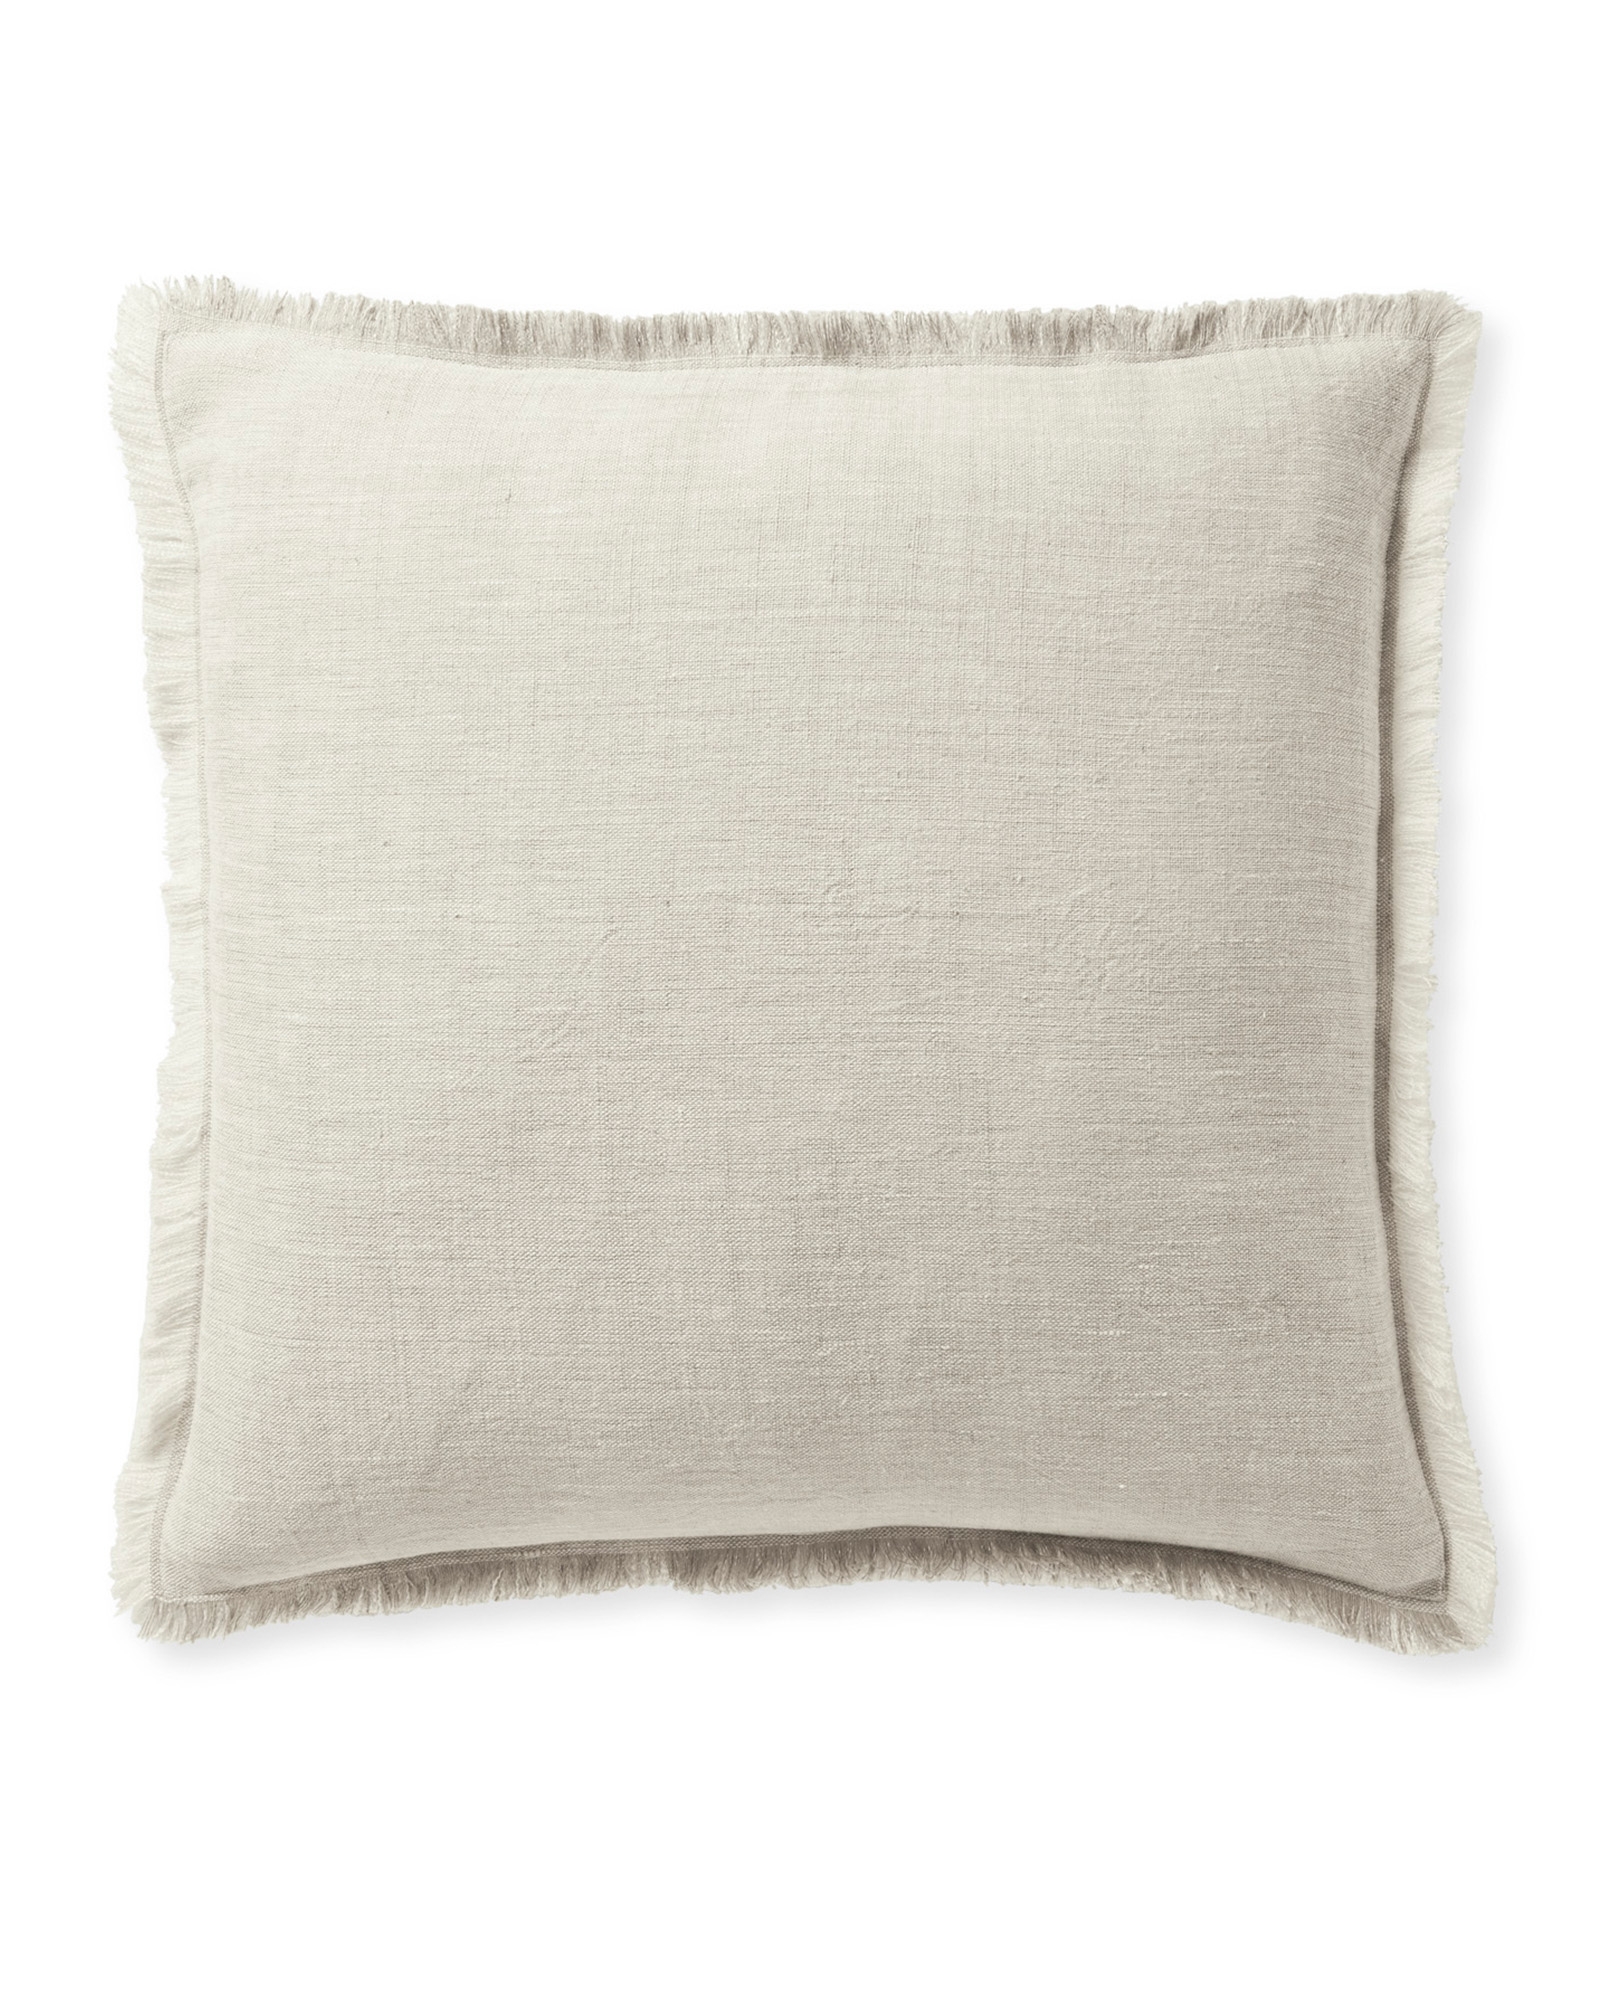 Avalis Pillow Cover, Sand, 24" x 24" - Image 0